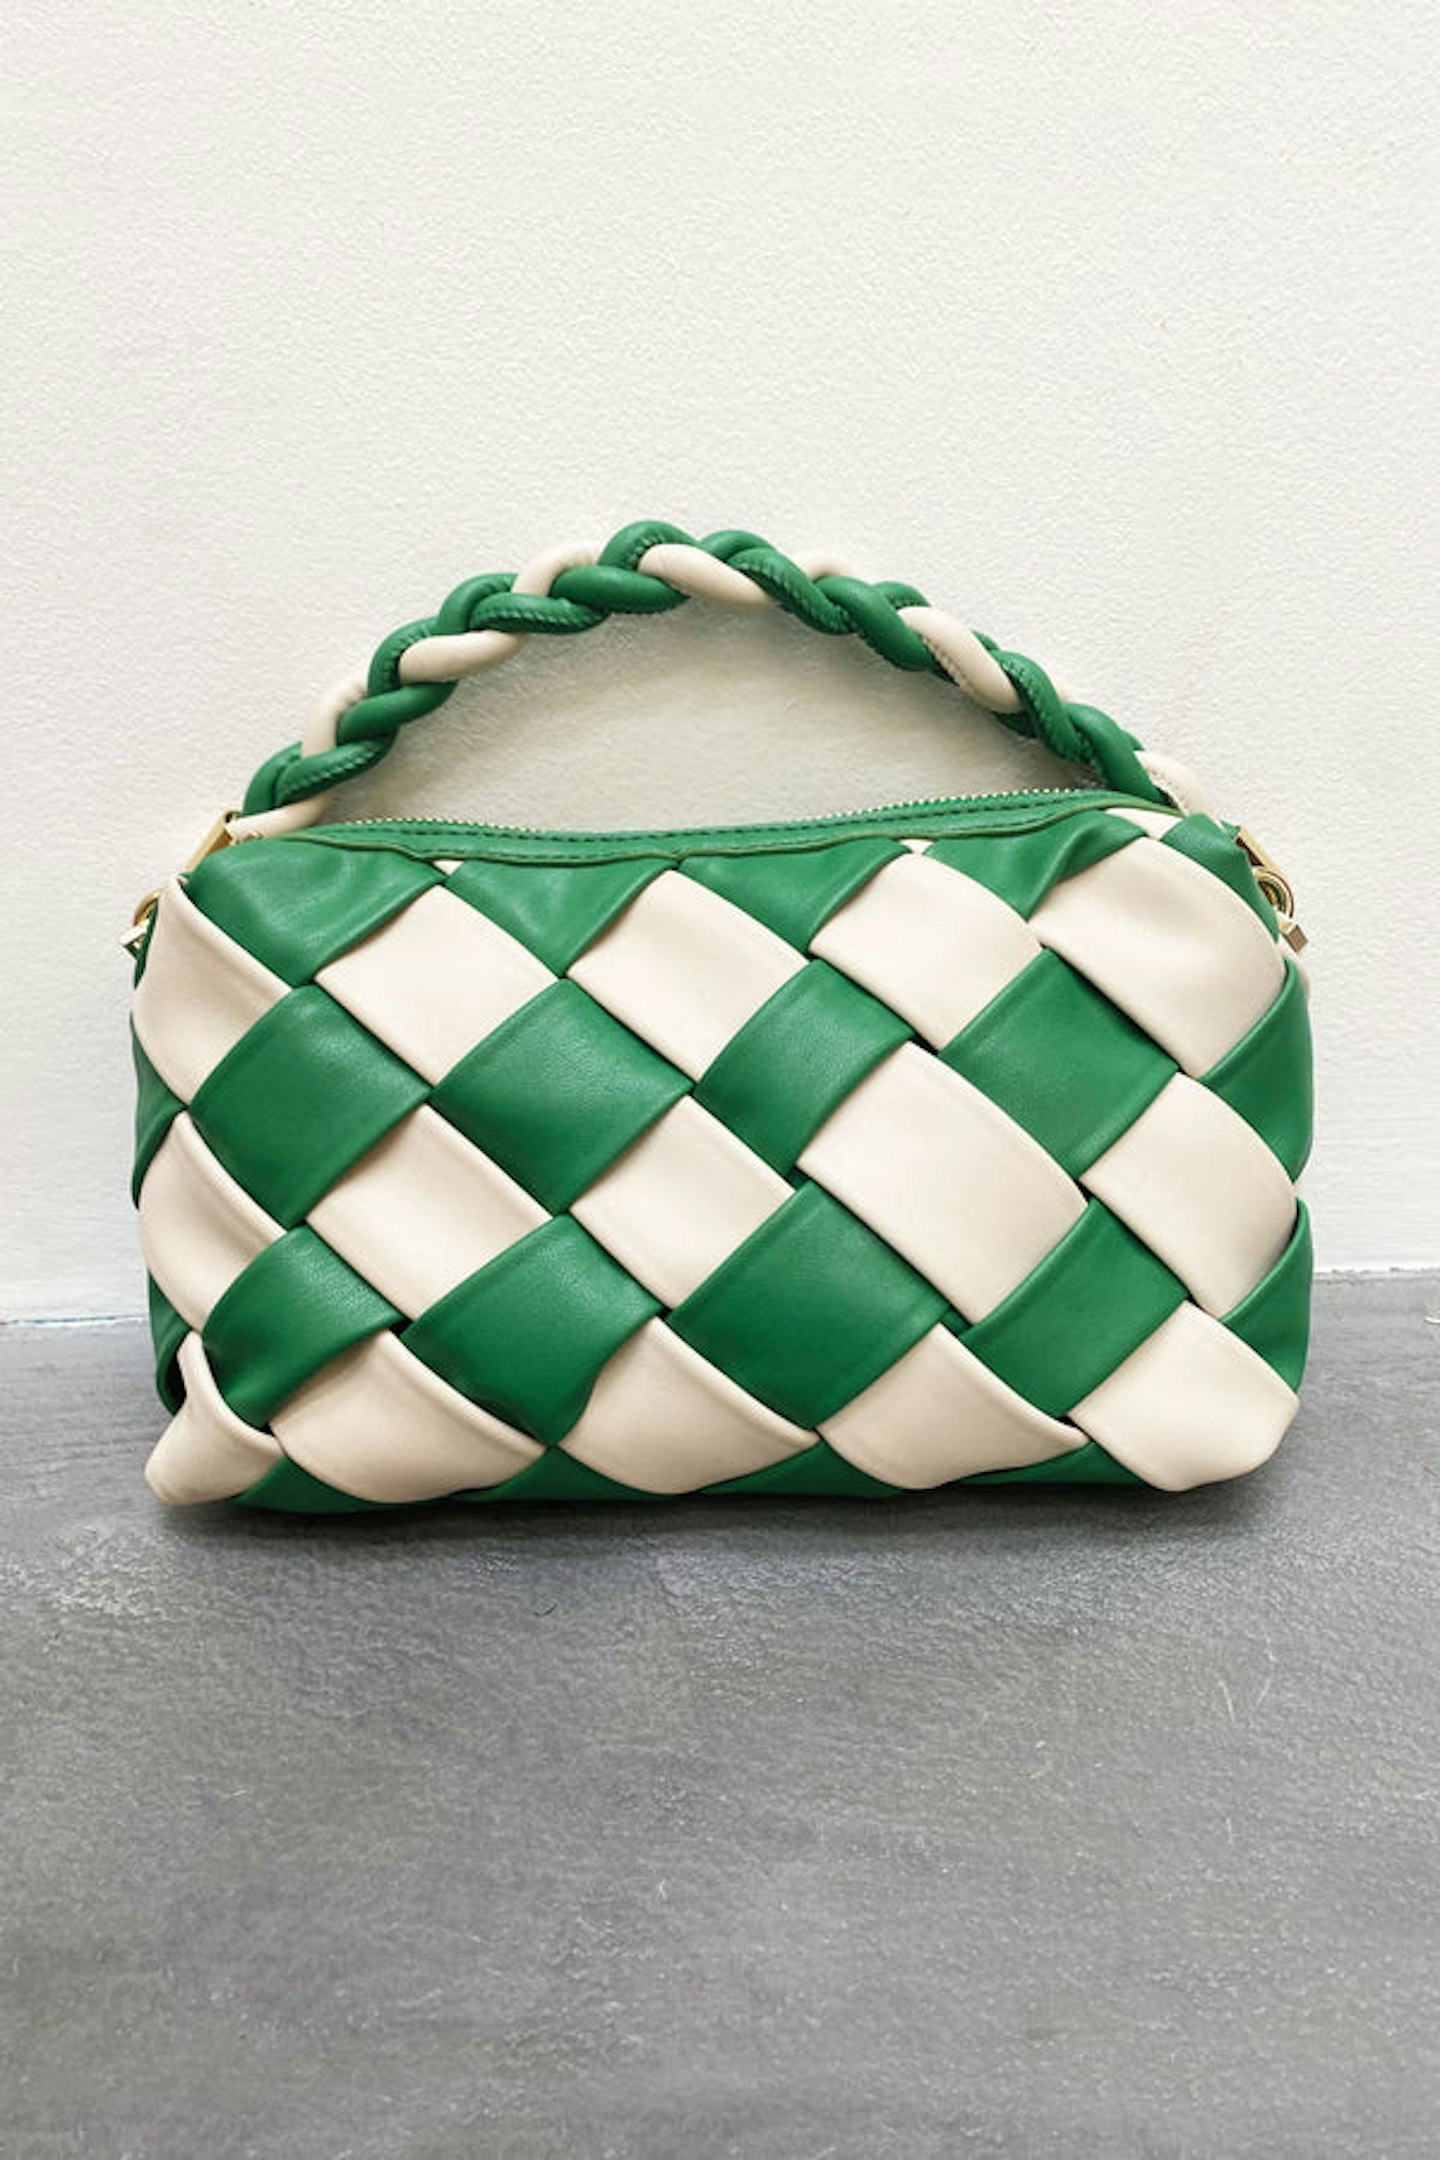 Never Fully Dressed, Green And Cream Chesca Bag